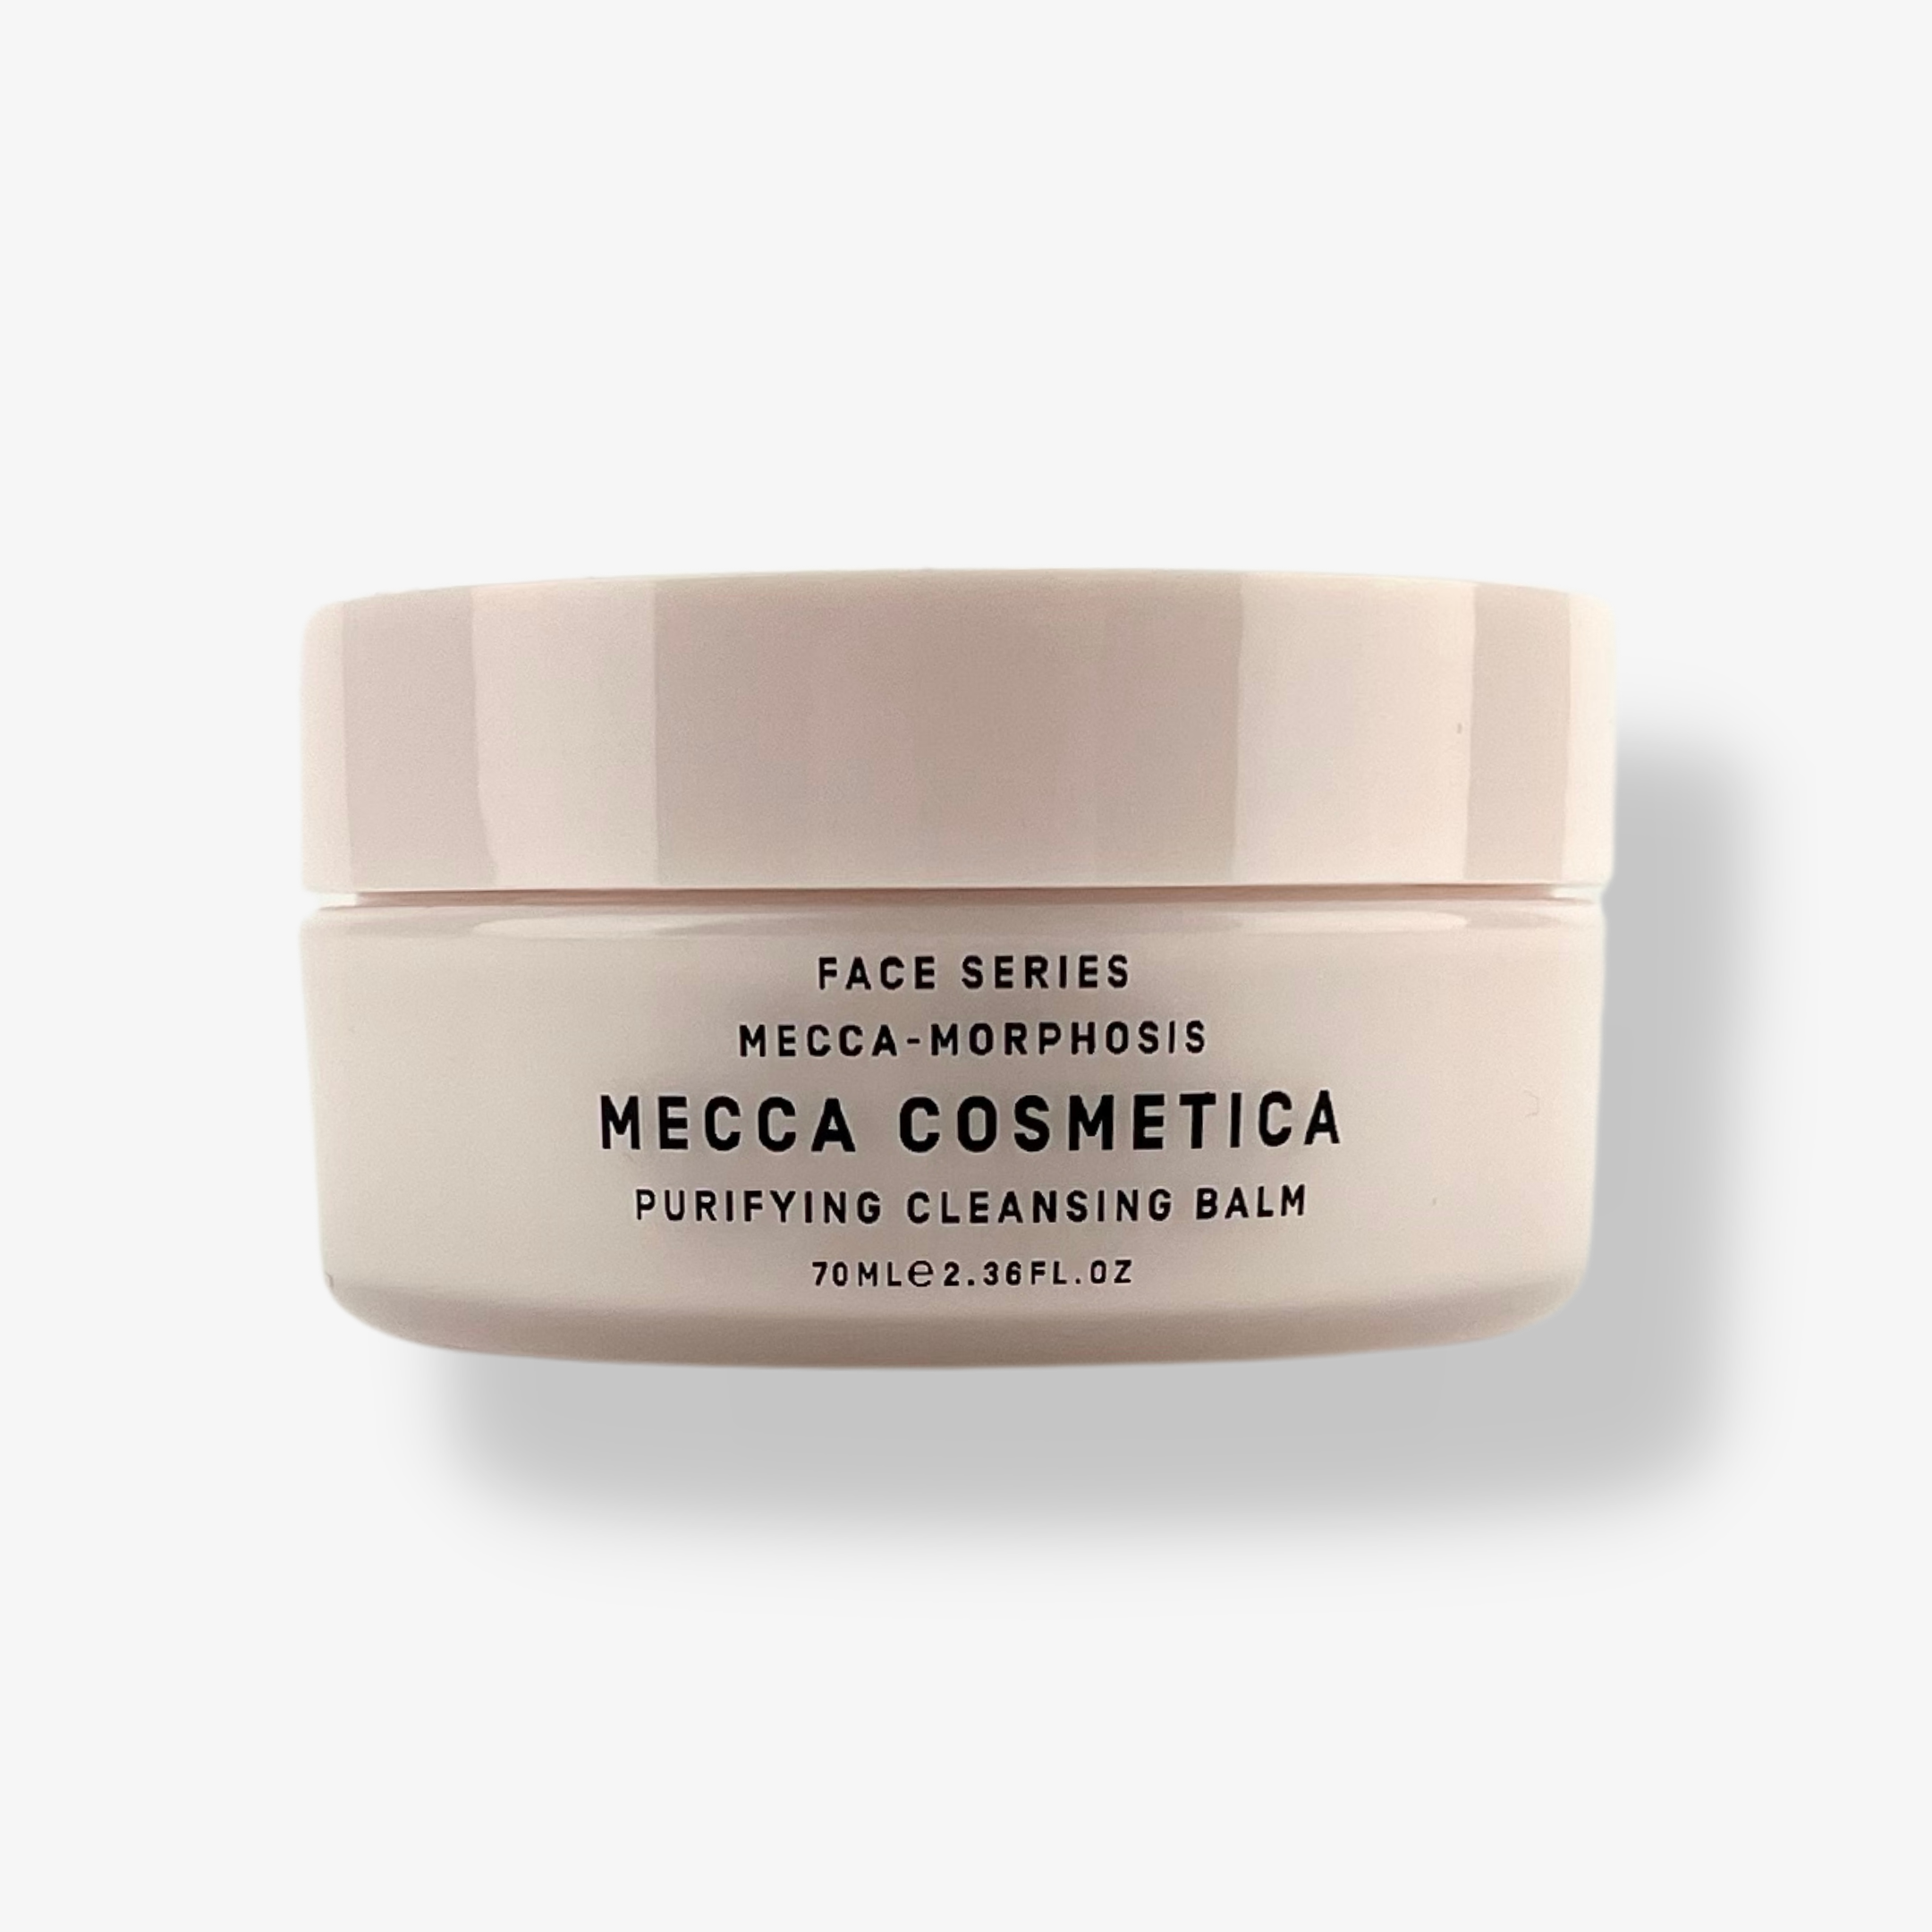 Mecca-morphosis Purifying Cleansing Balm